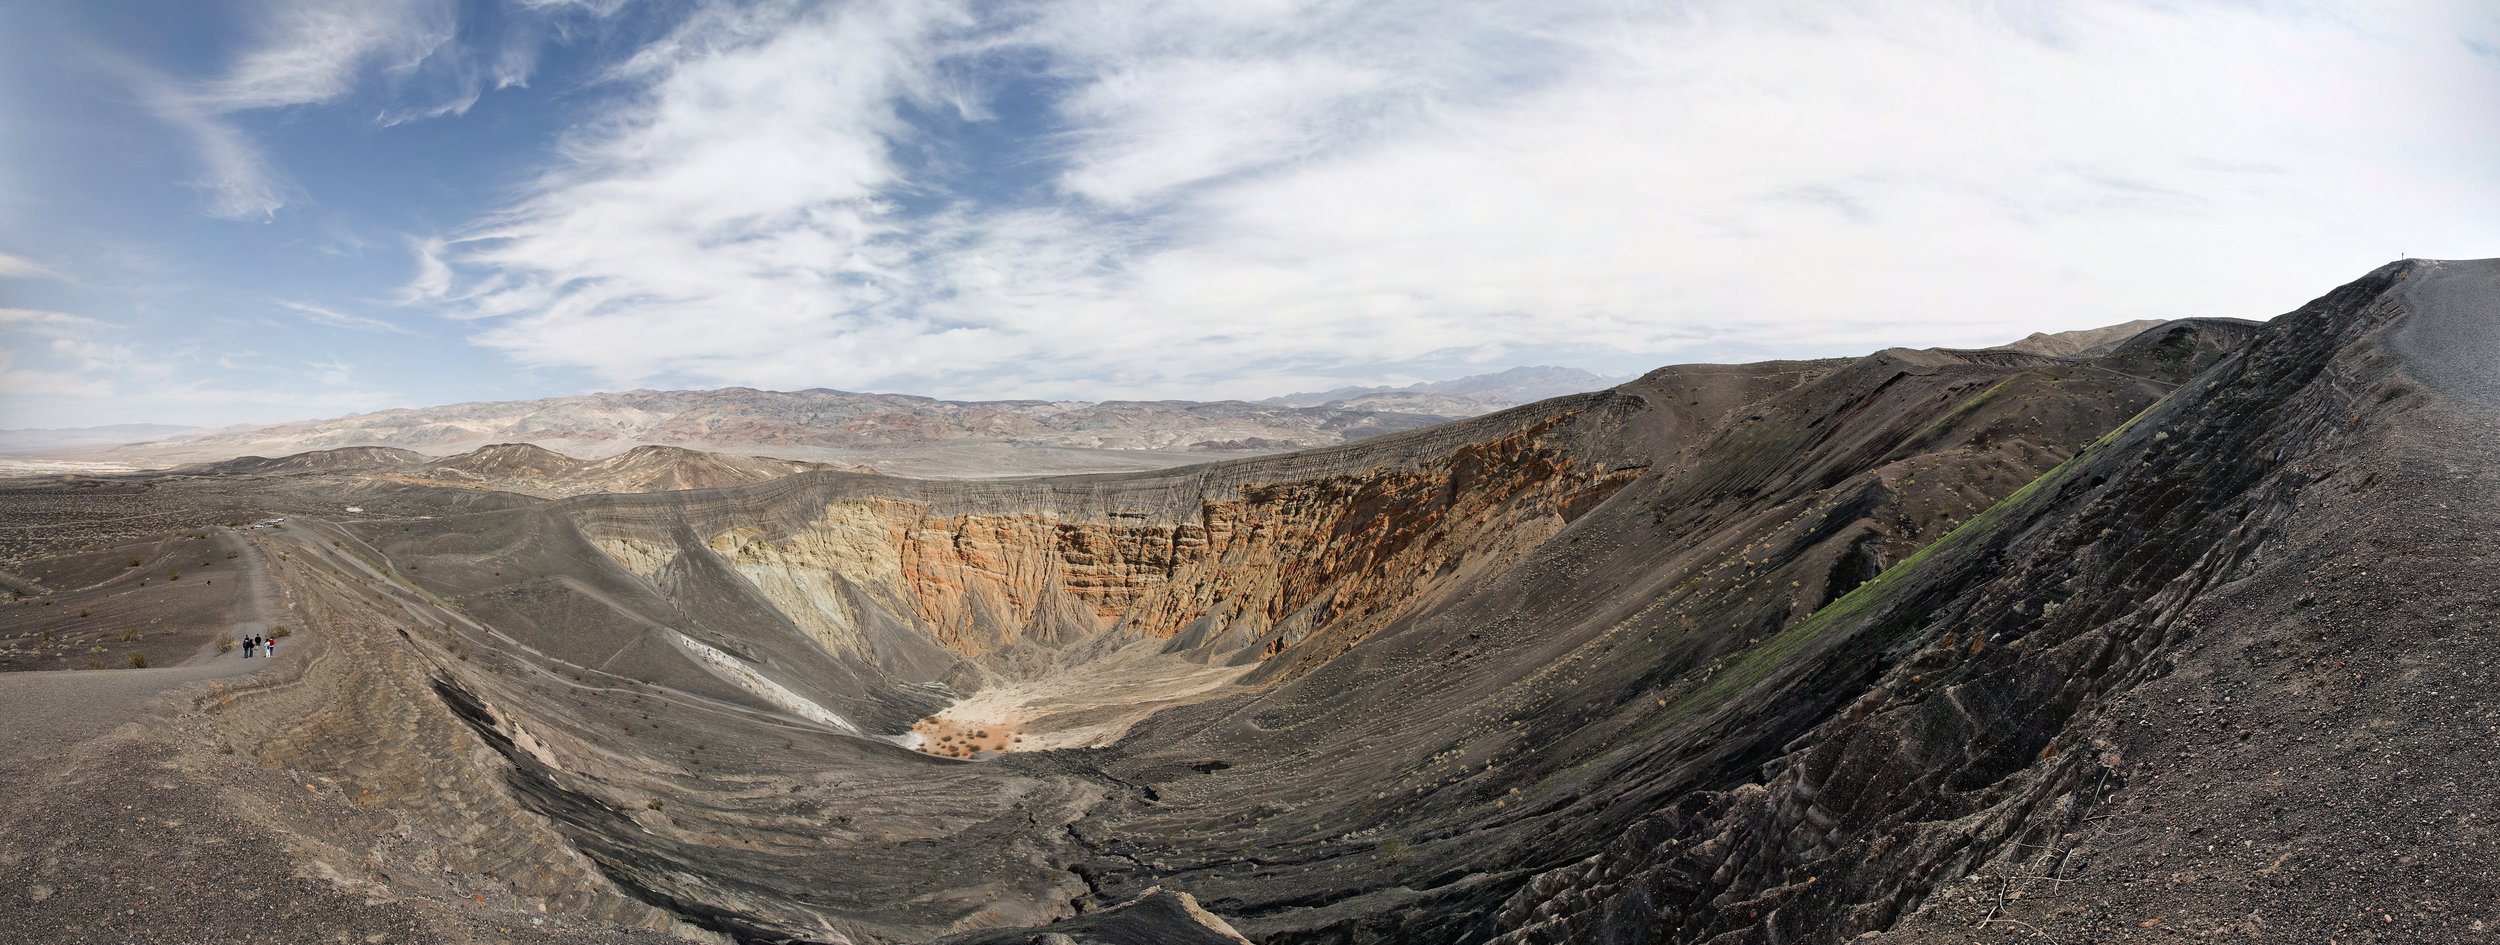   ubehebe crater panorama 3   up to 27" x 72"  2009     